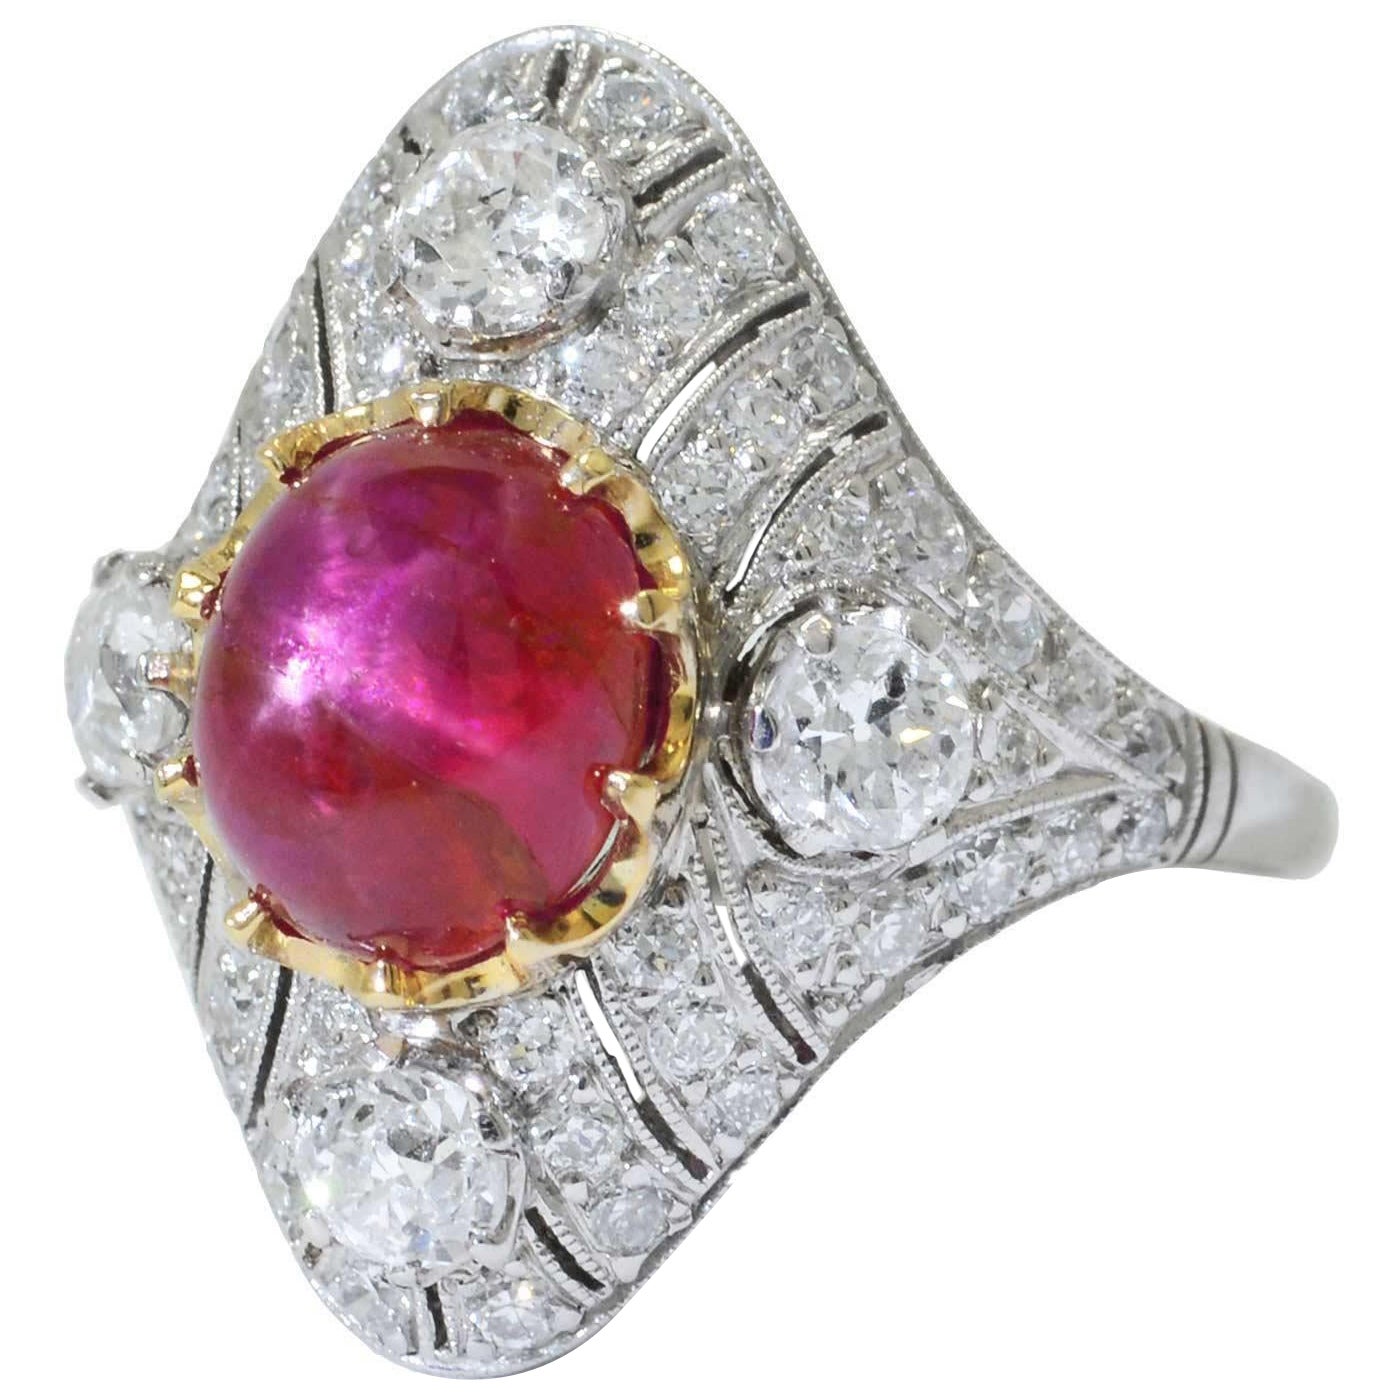 For Sale:  GIA Certified No Heat Burma Star Ruby Engagement Ring